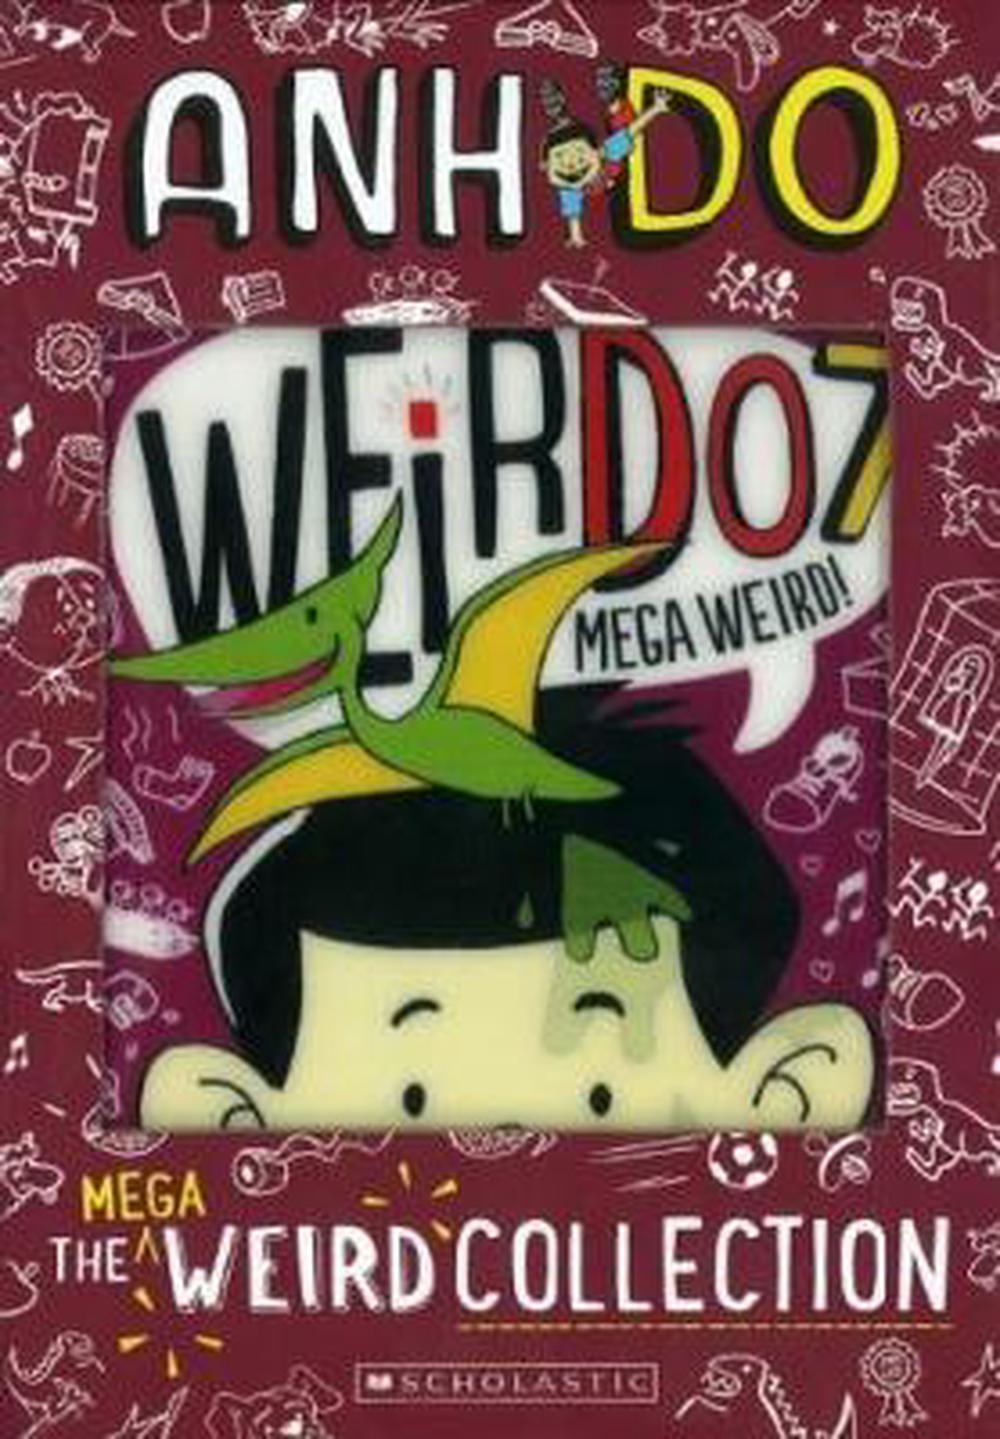 Mega Weird Collection 1-7 by Anh Do, 9781742763200 | Buy online at The Nile